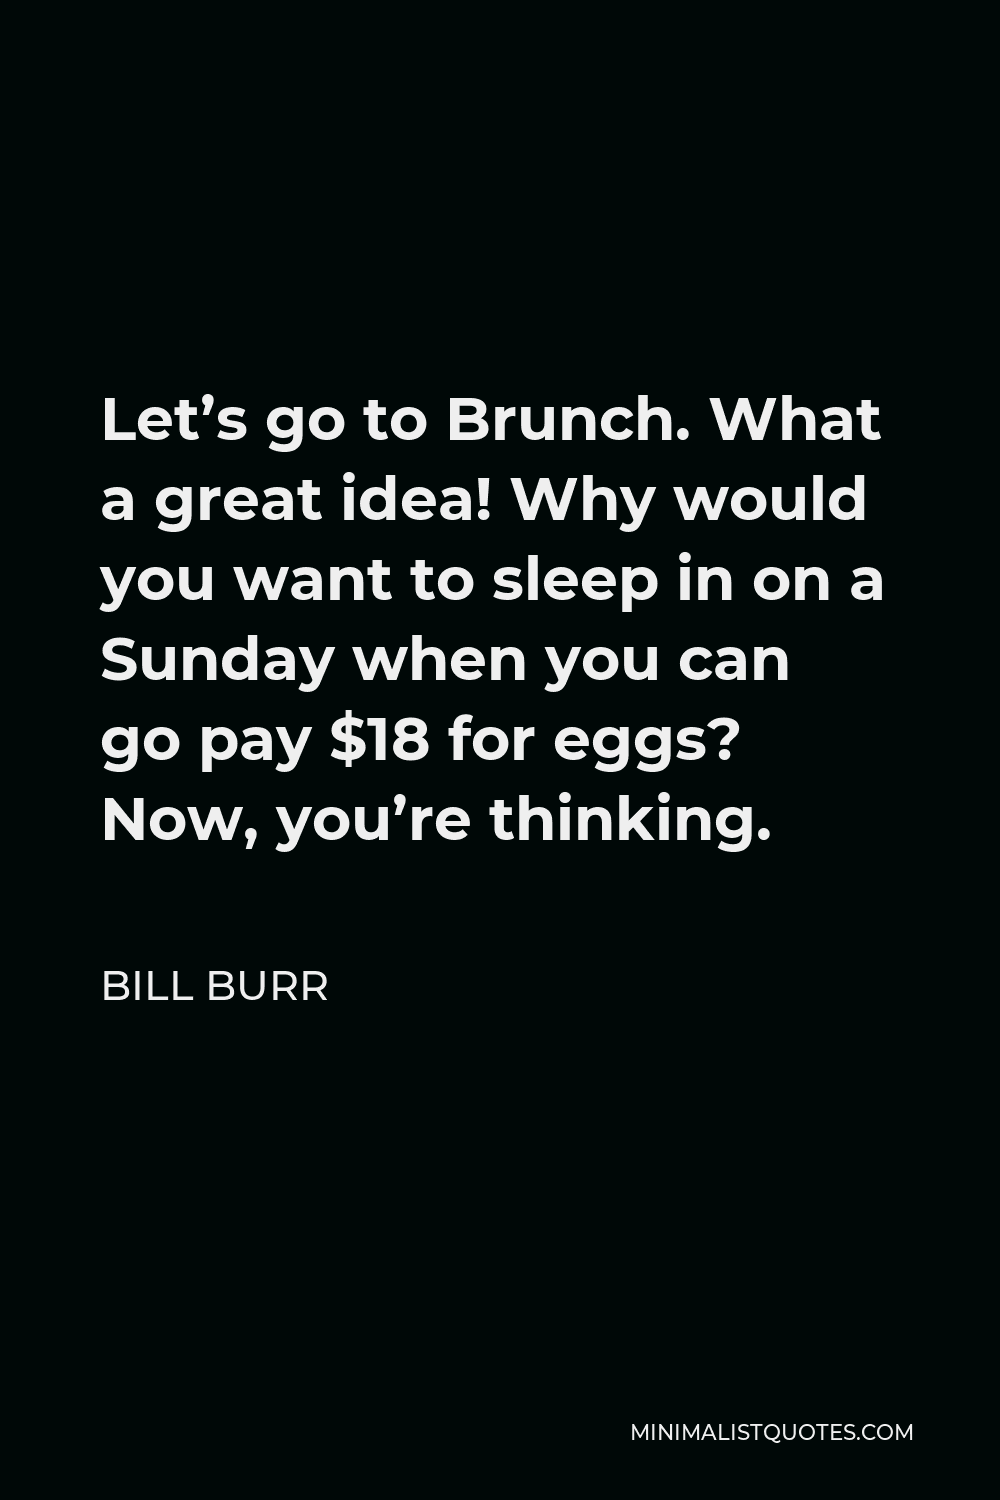 Bill Burr Quote - Let’s go to Brunch. What a great idea! Why would you want to sleep in on a Sunday when you can go pay $18 for eggs? Now, you’re thinking.